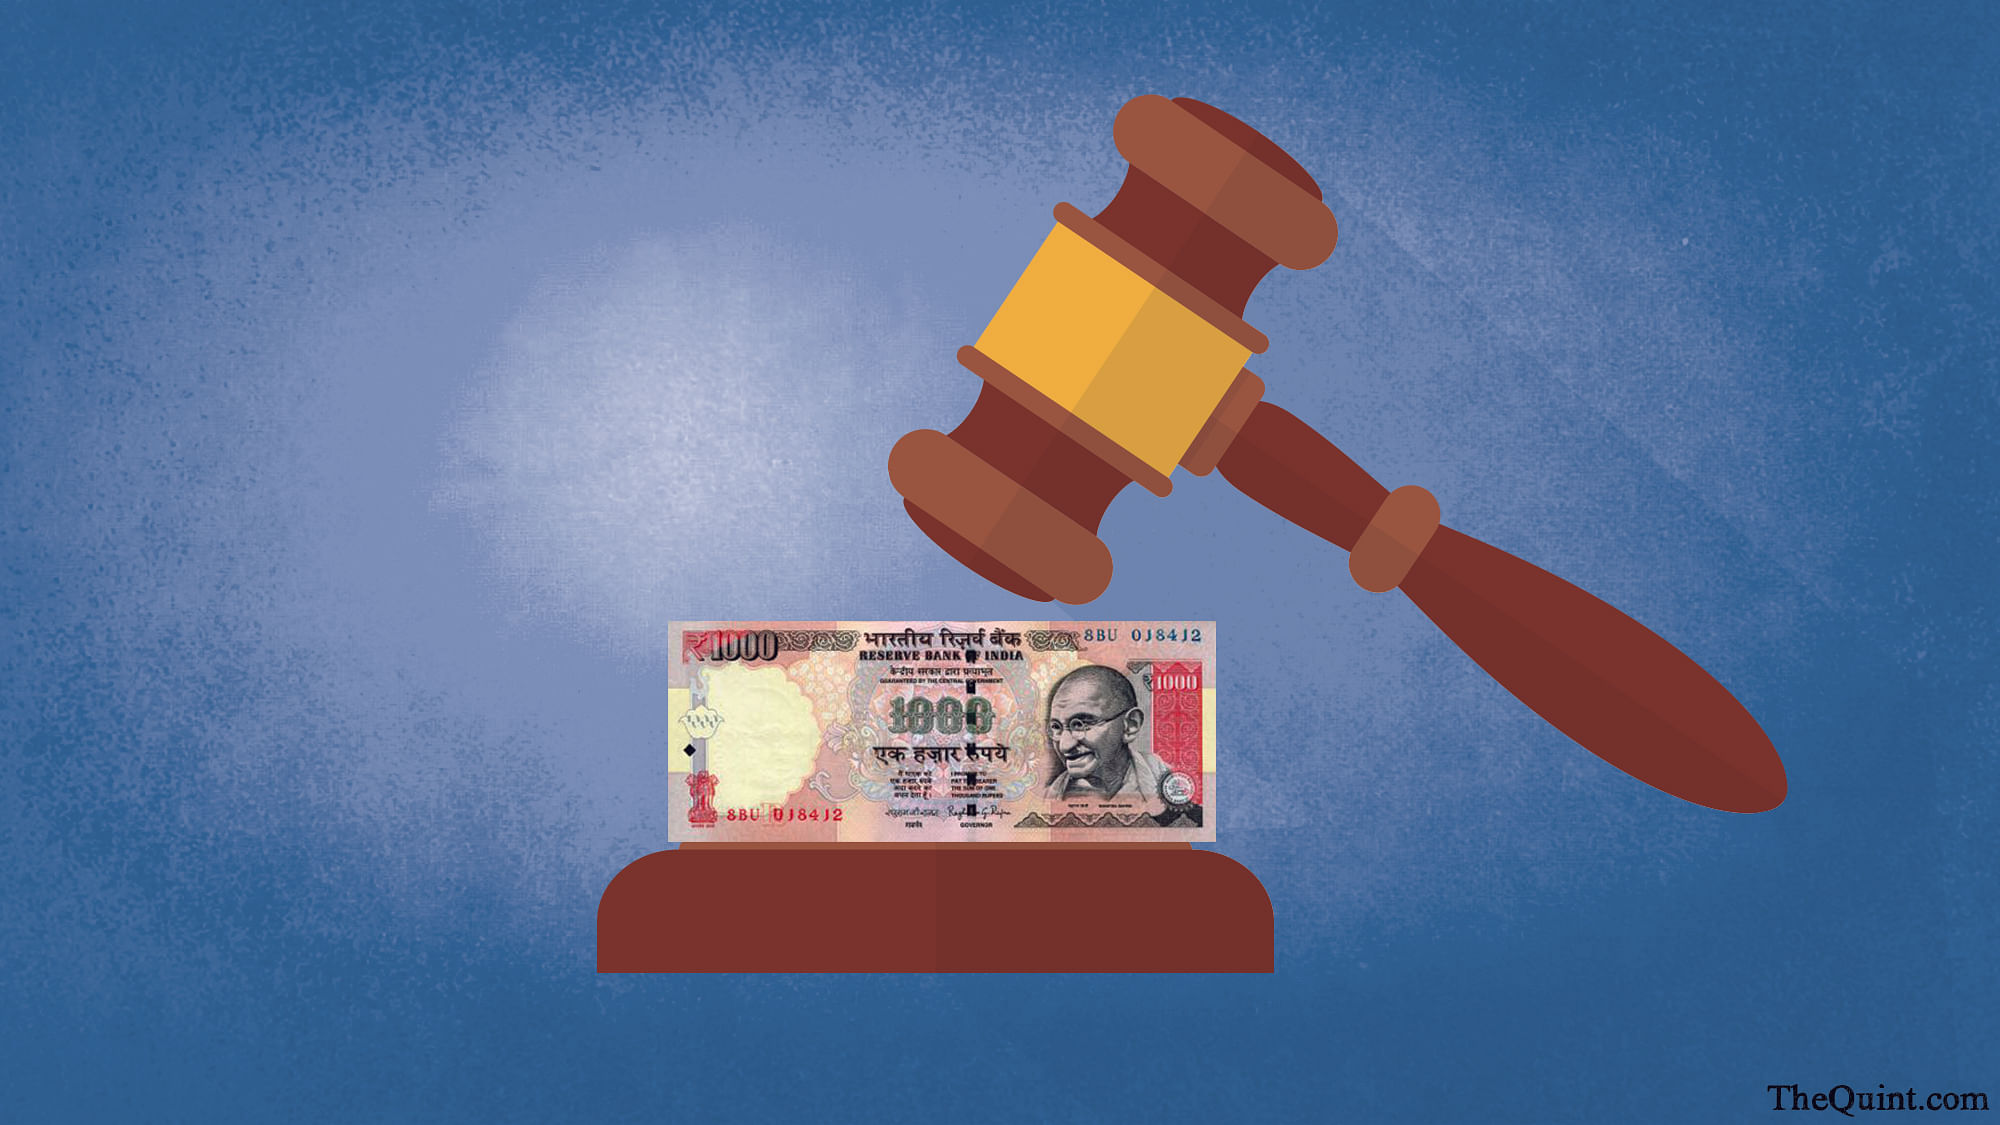 Unlike 1978, demonetisation in 2016 has violated fundamental rights in more ways than one. (Photo: Rhythum Seth/ <b>The Quint</b>)